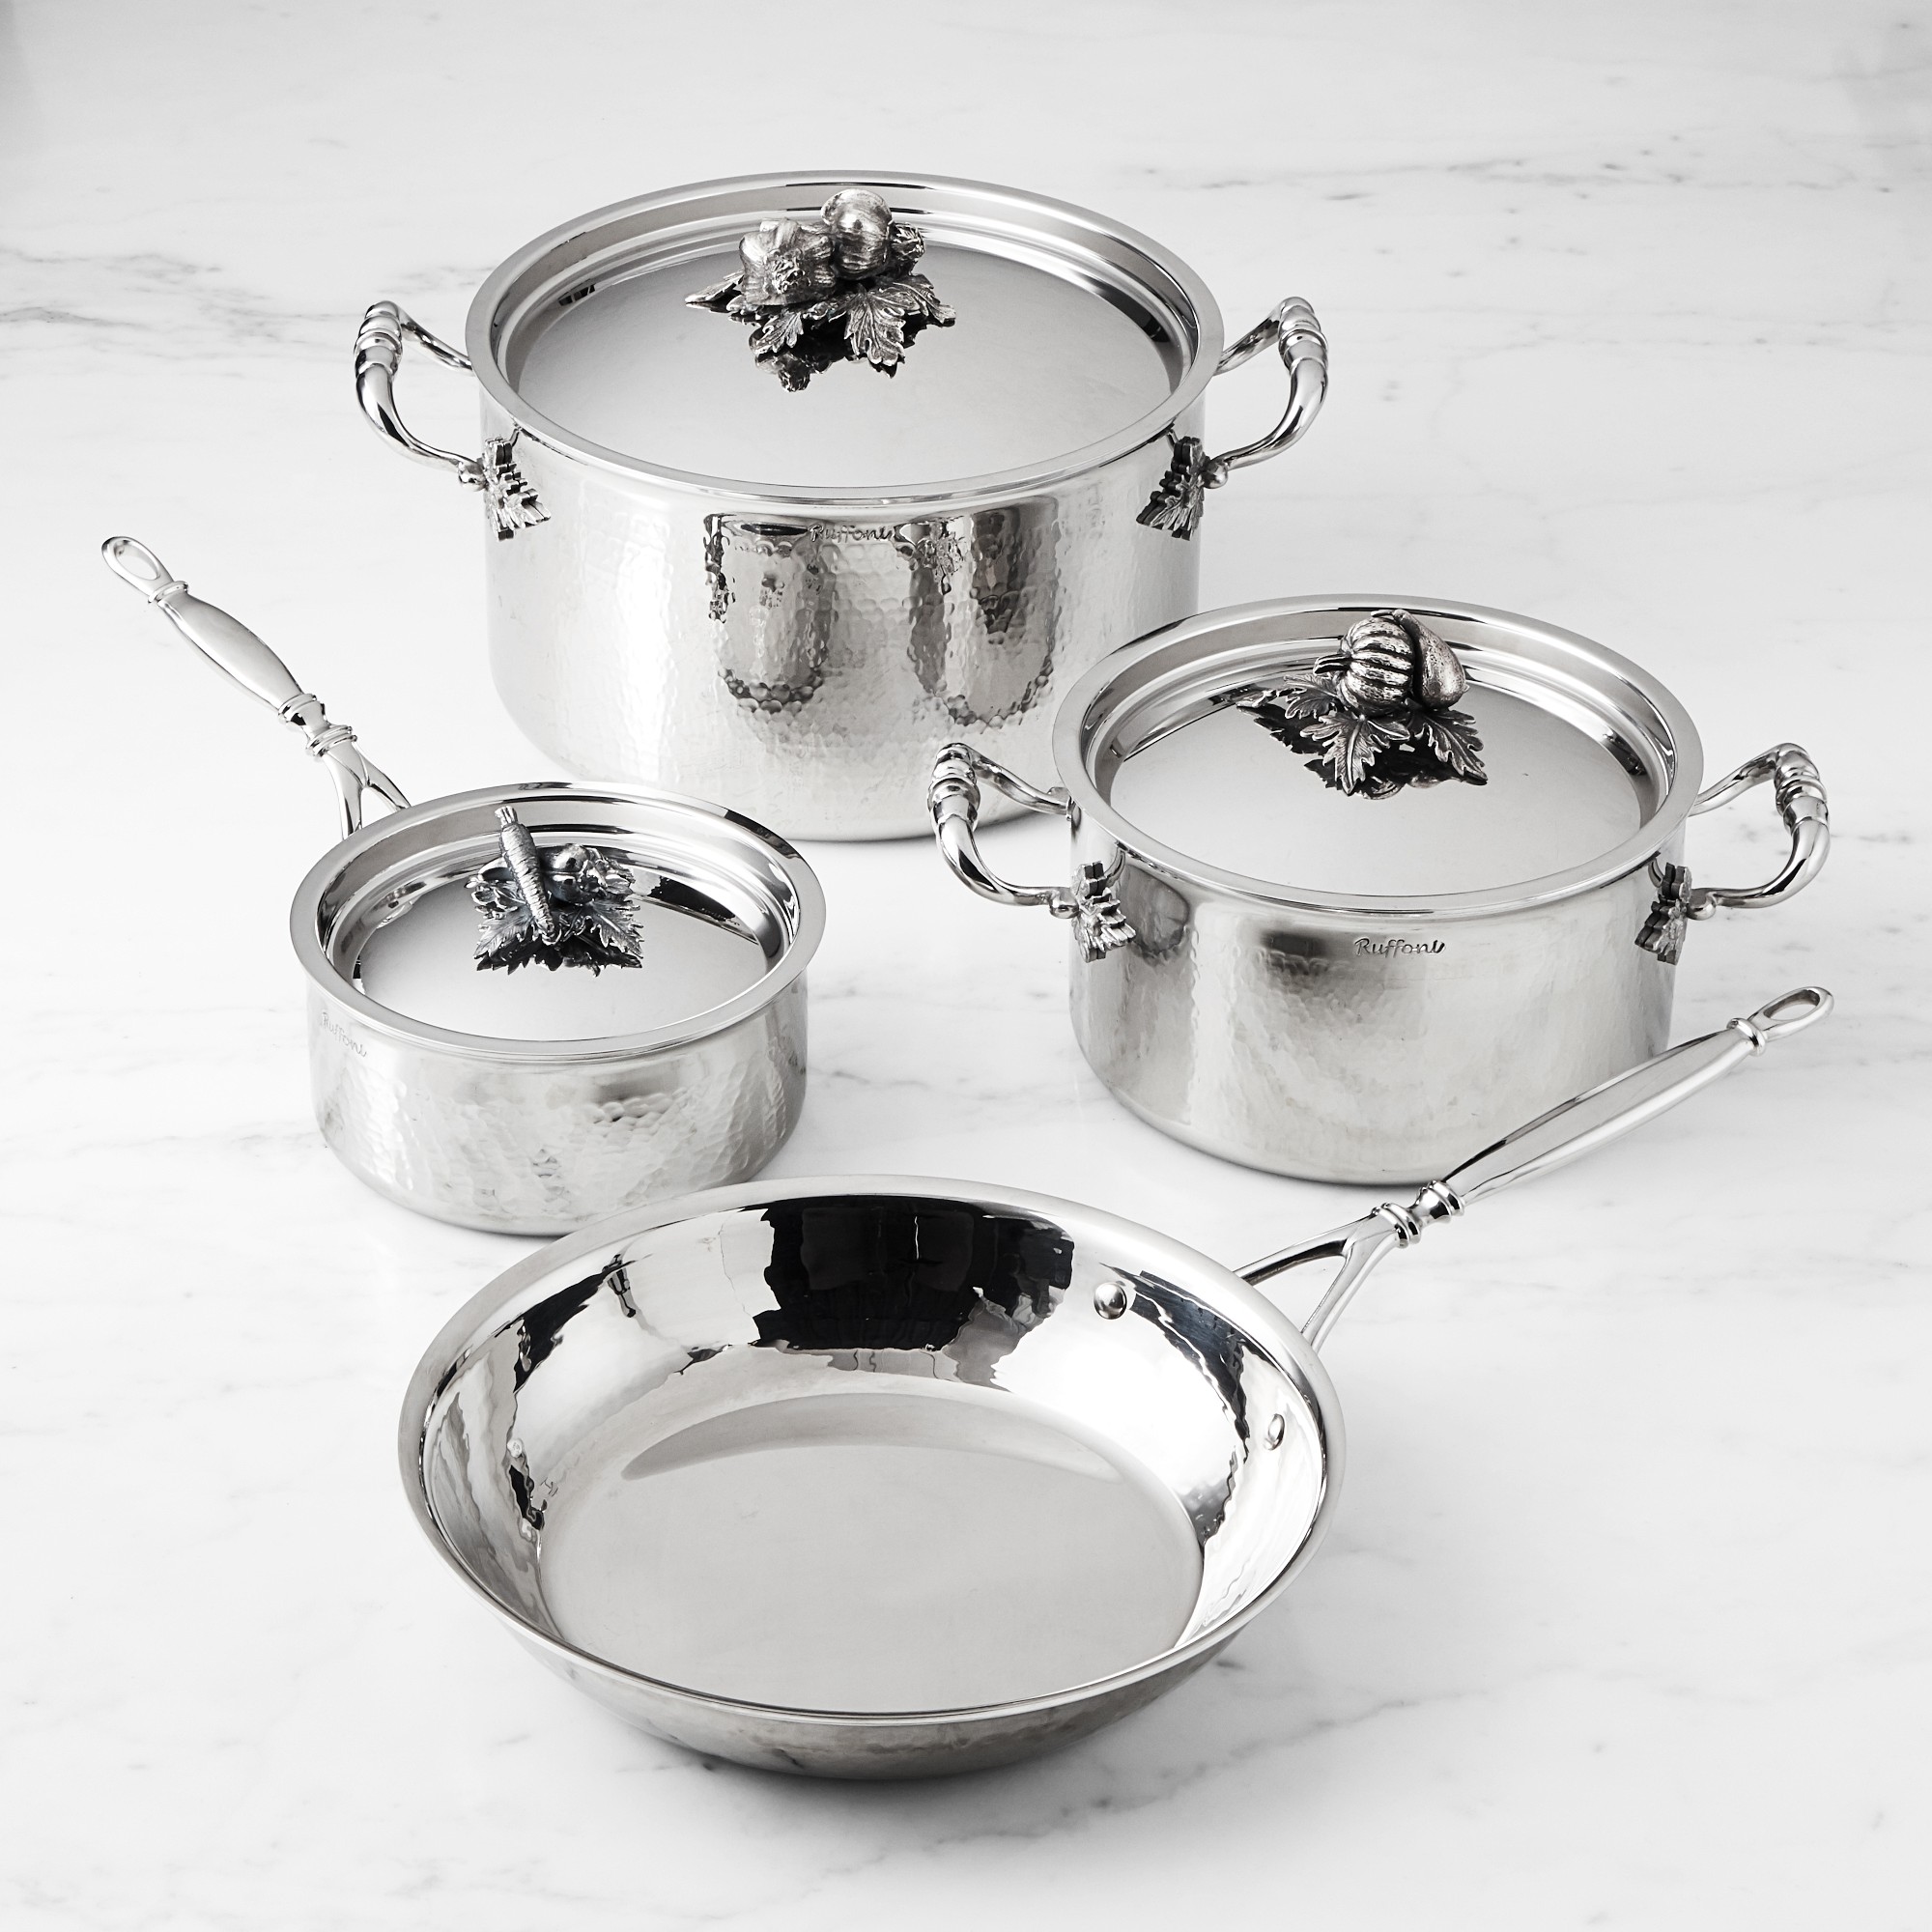 Ruffoni Opus Prima Hammered Stainless Steel -Piece Cookware Set